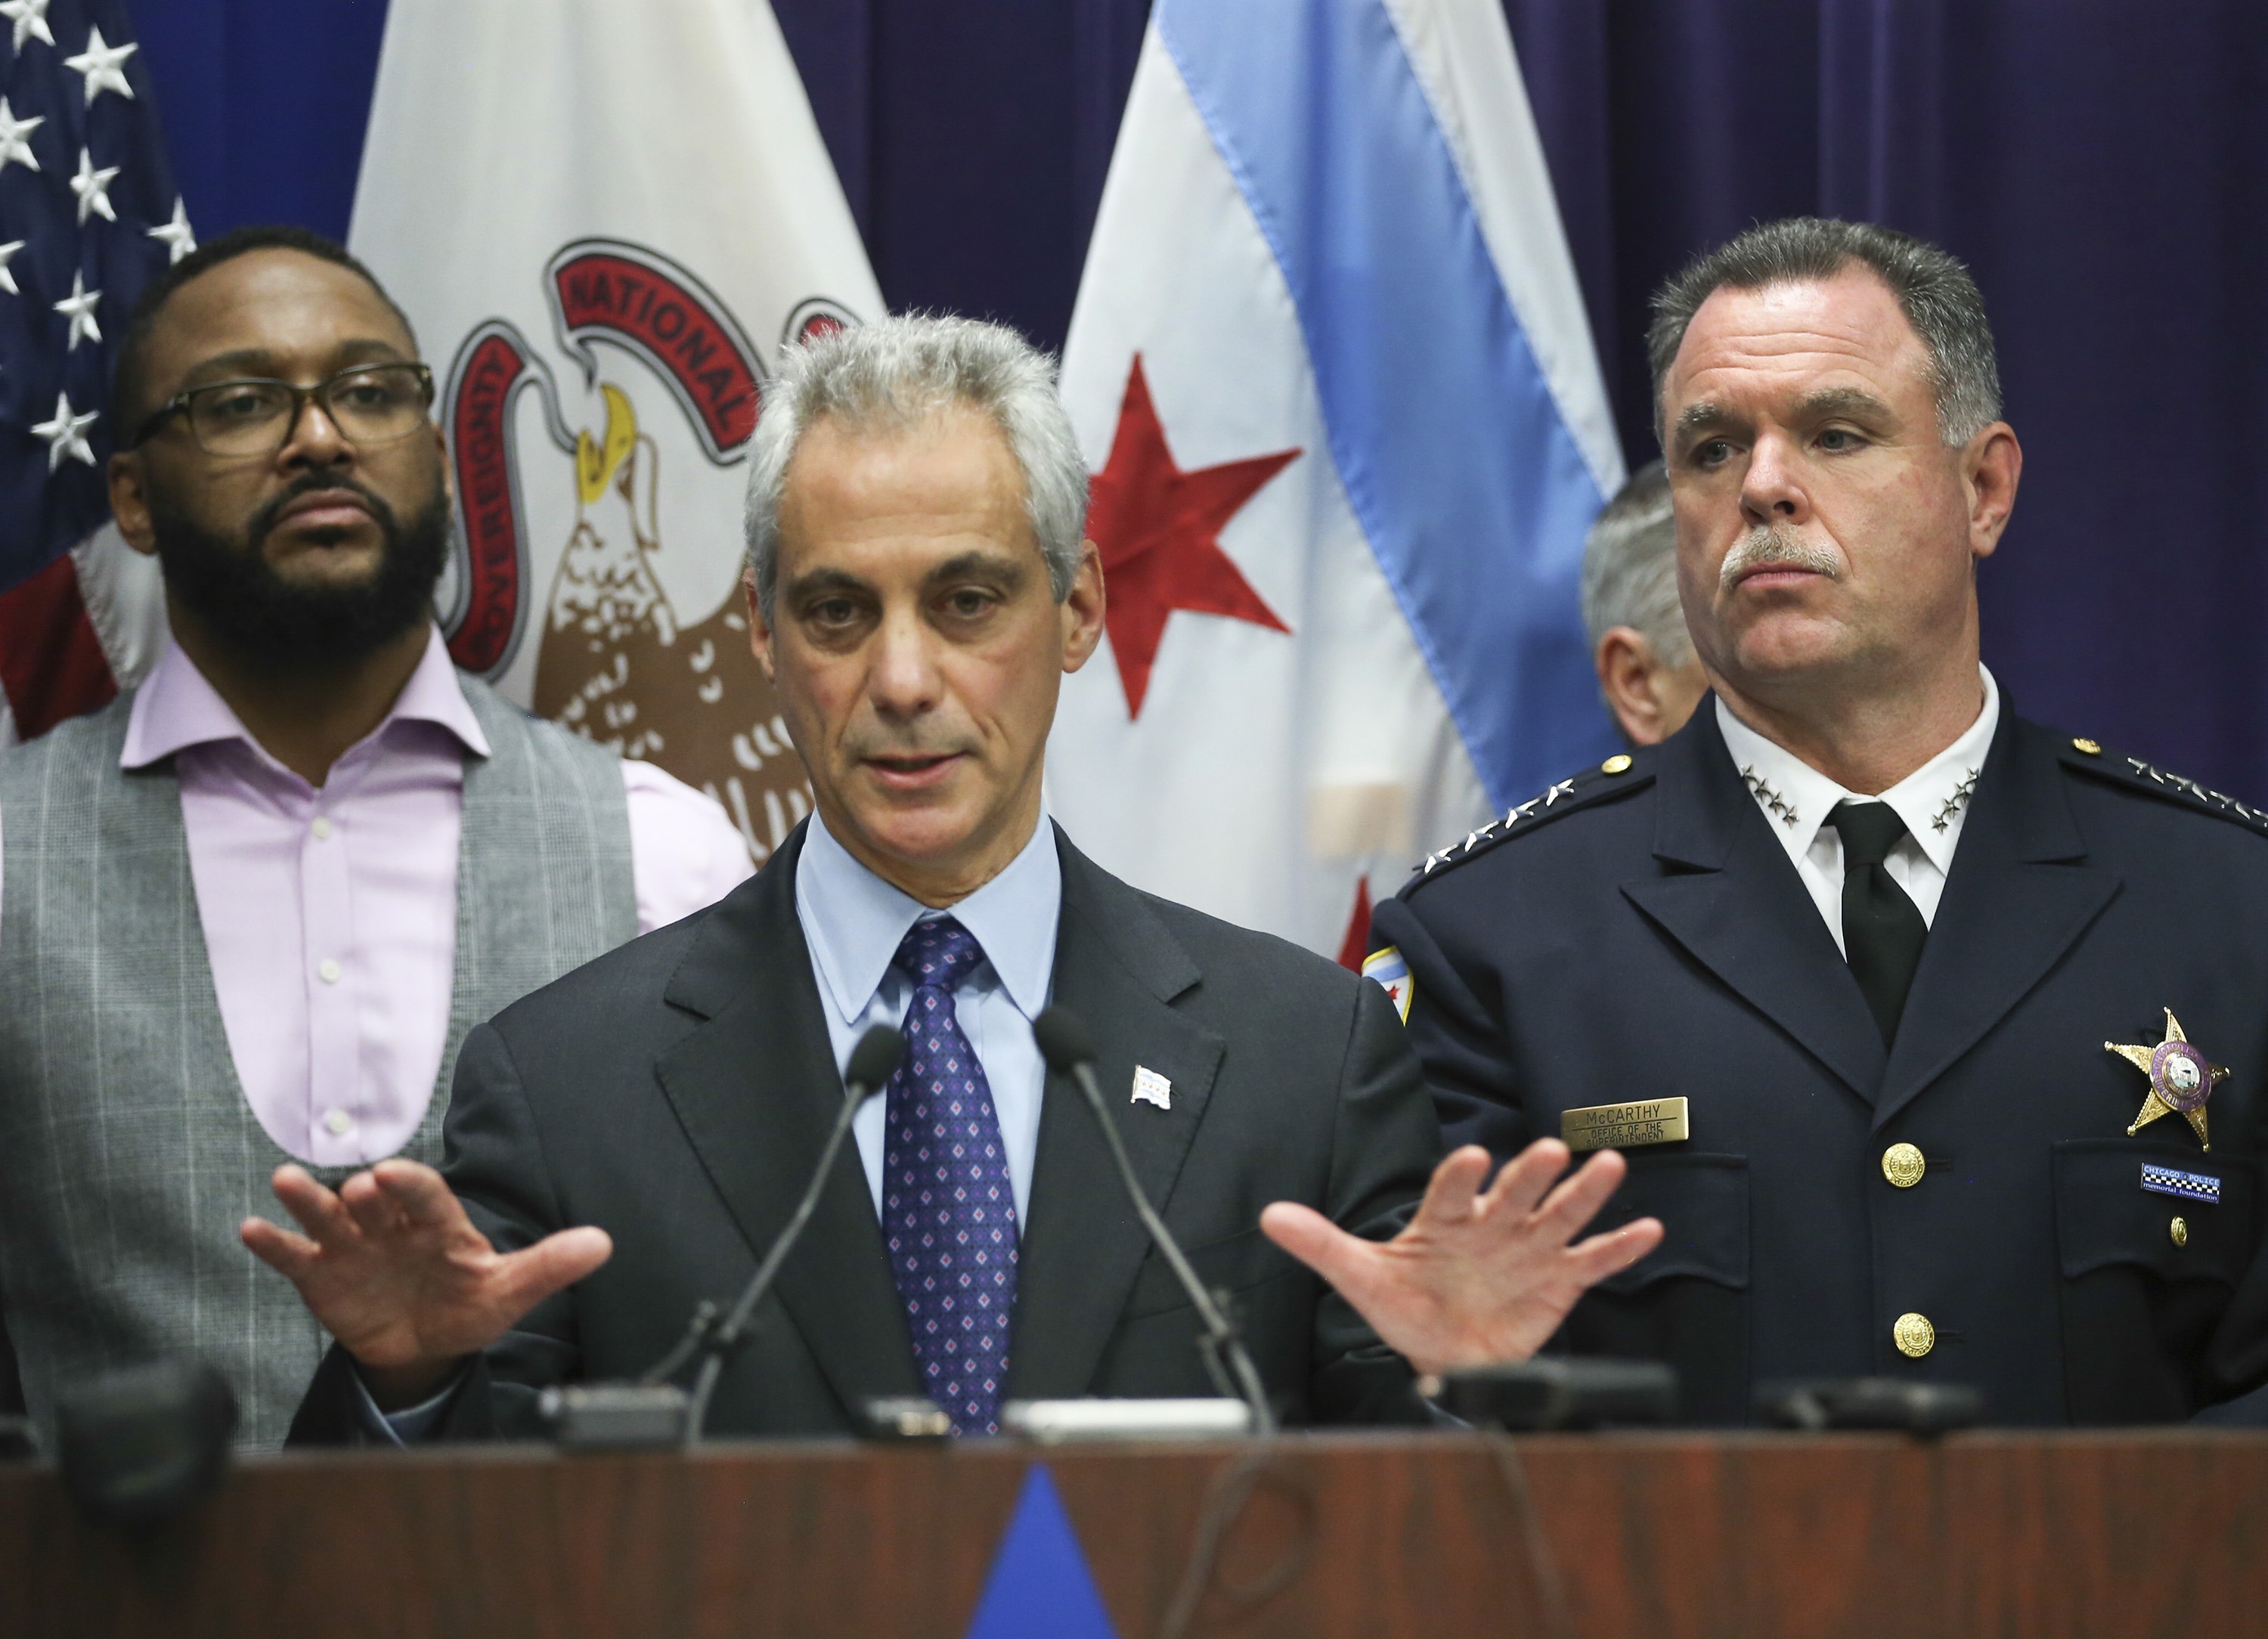 Mayor Rahm Emanuel and Chicago Police Supt. Garry McCarthy, hold a news conference at Chicago Police Headquarters in Chicago on Nov. 24, 2015. (Nuccio DiNuzzo—Chicago Tribune/Getty Images)